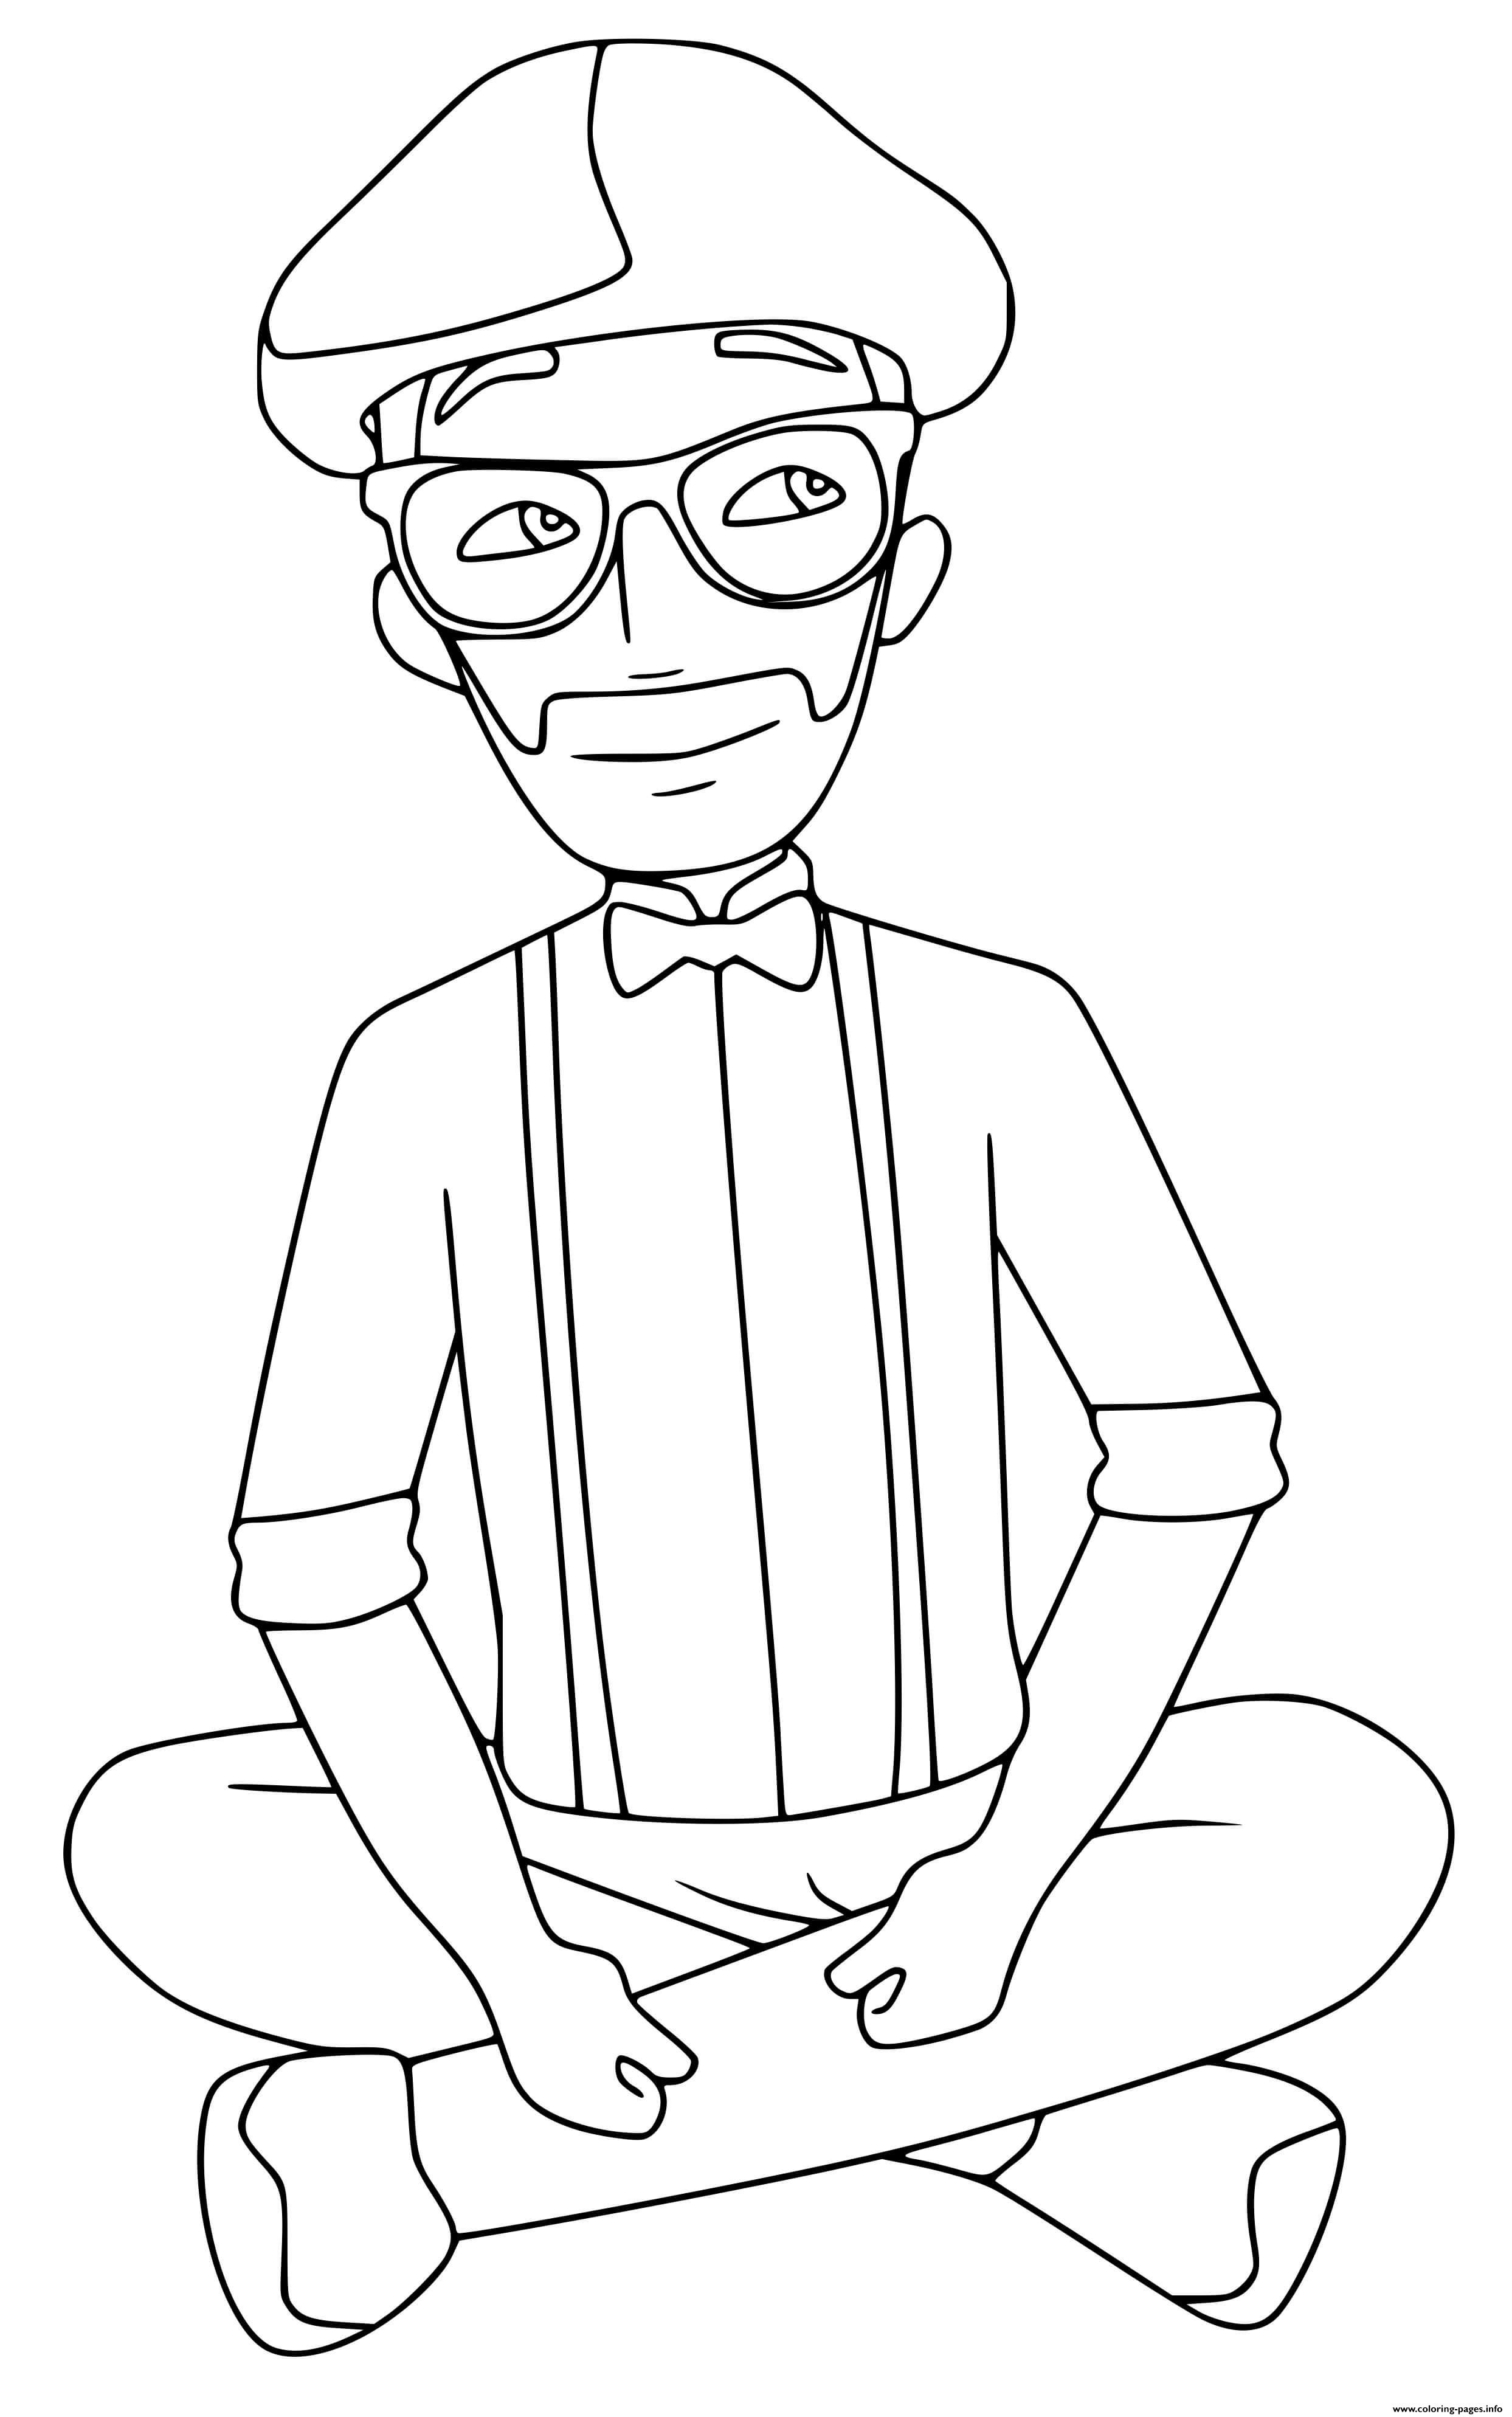 blippi-coloring-pages-coloring-pages-images-and-photos-finder